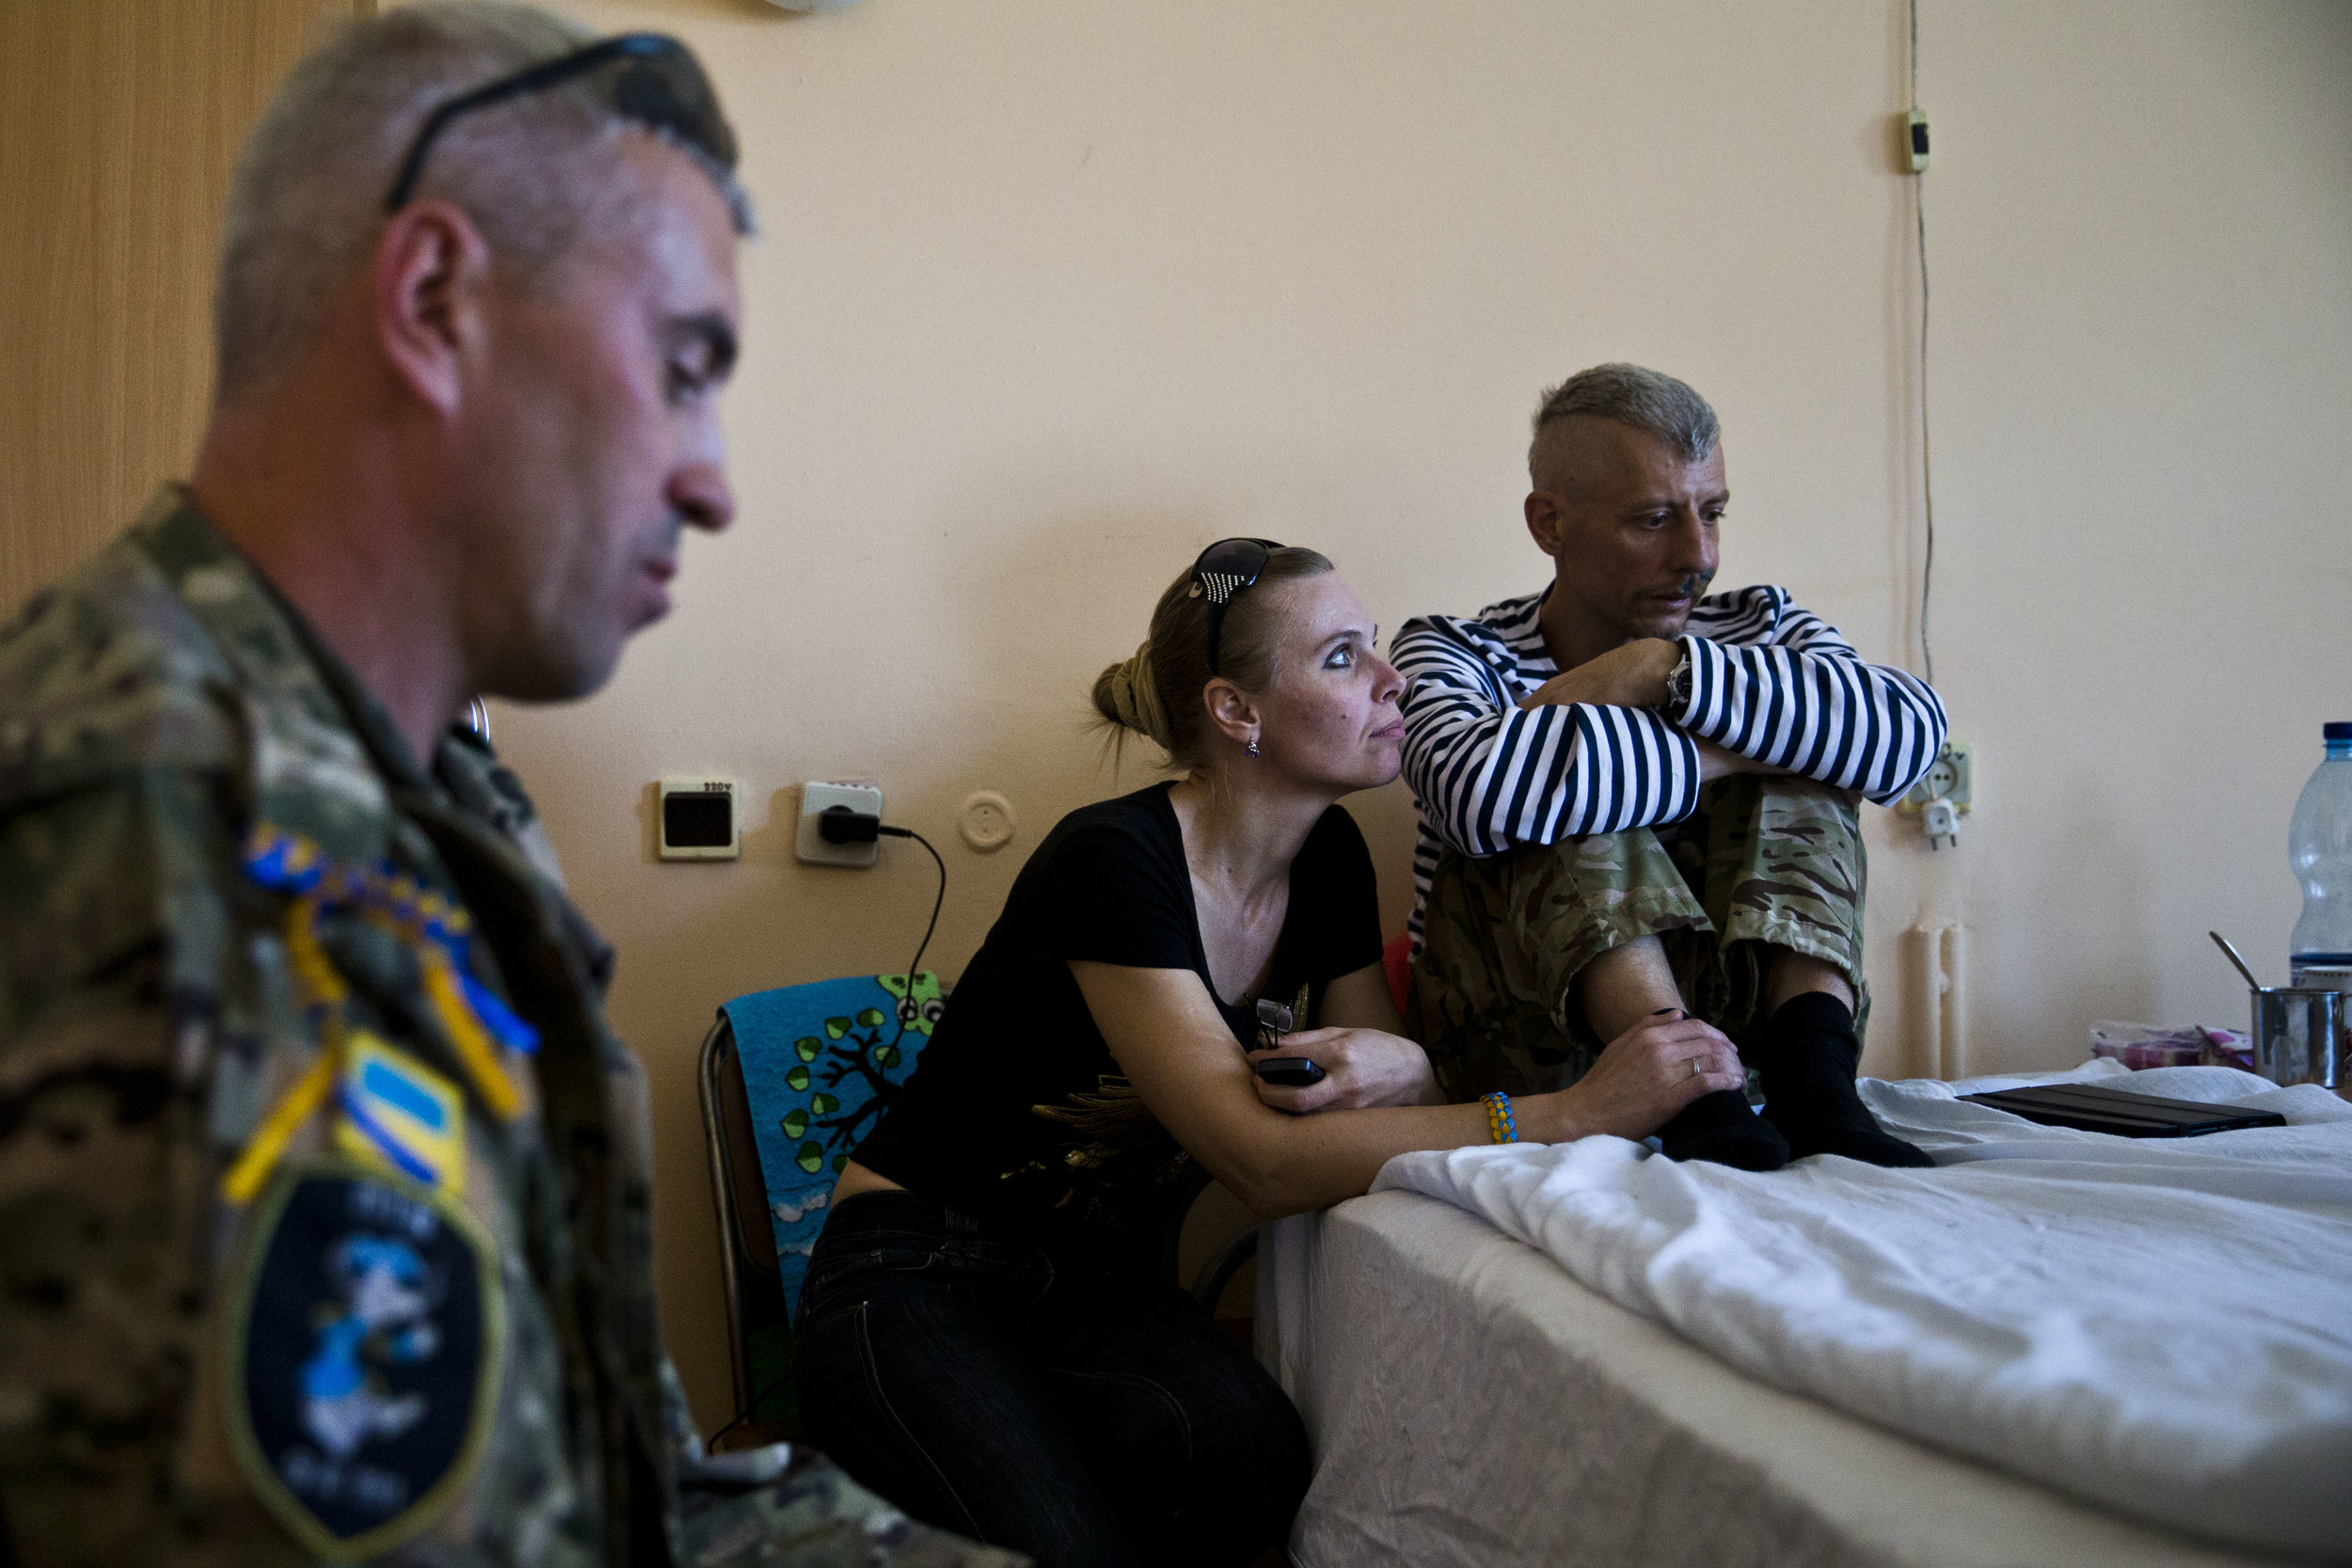  Wounded soldiers are seen in a hospital in Dniepropetrovsk 